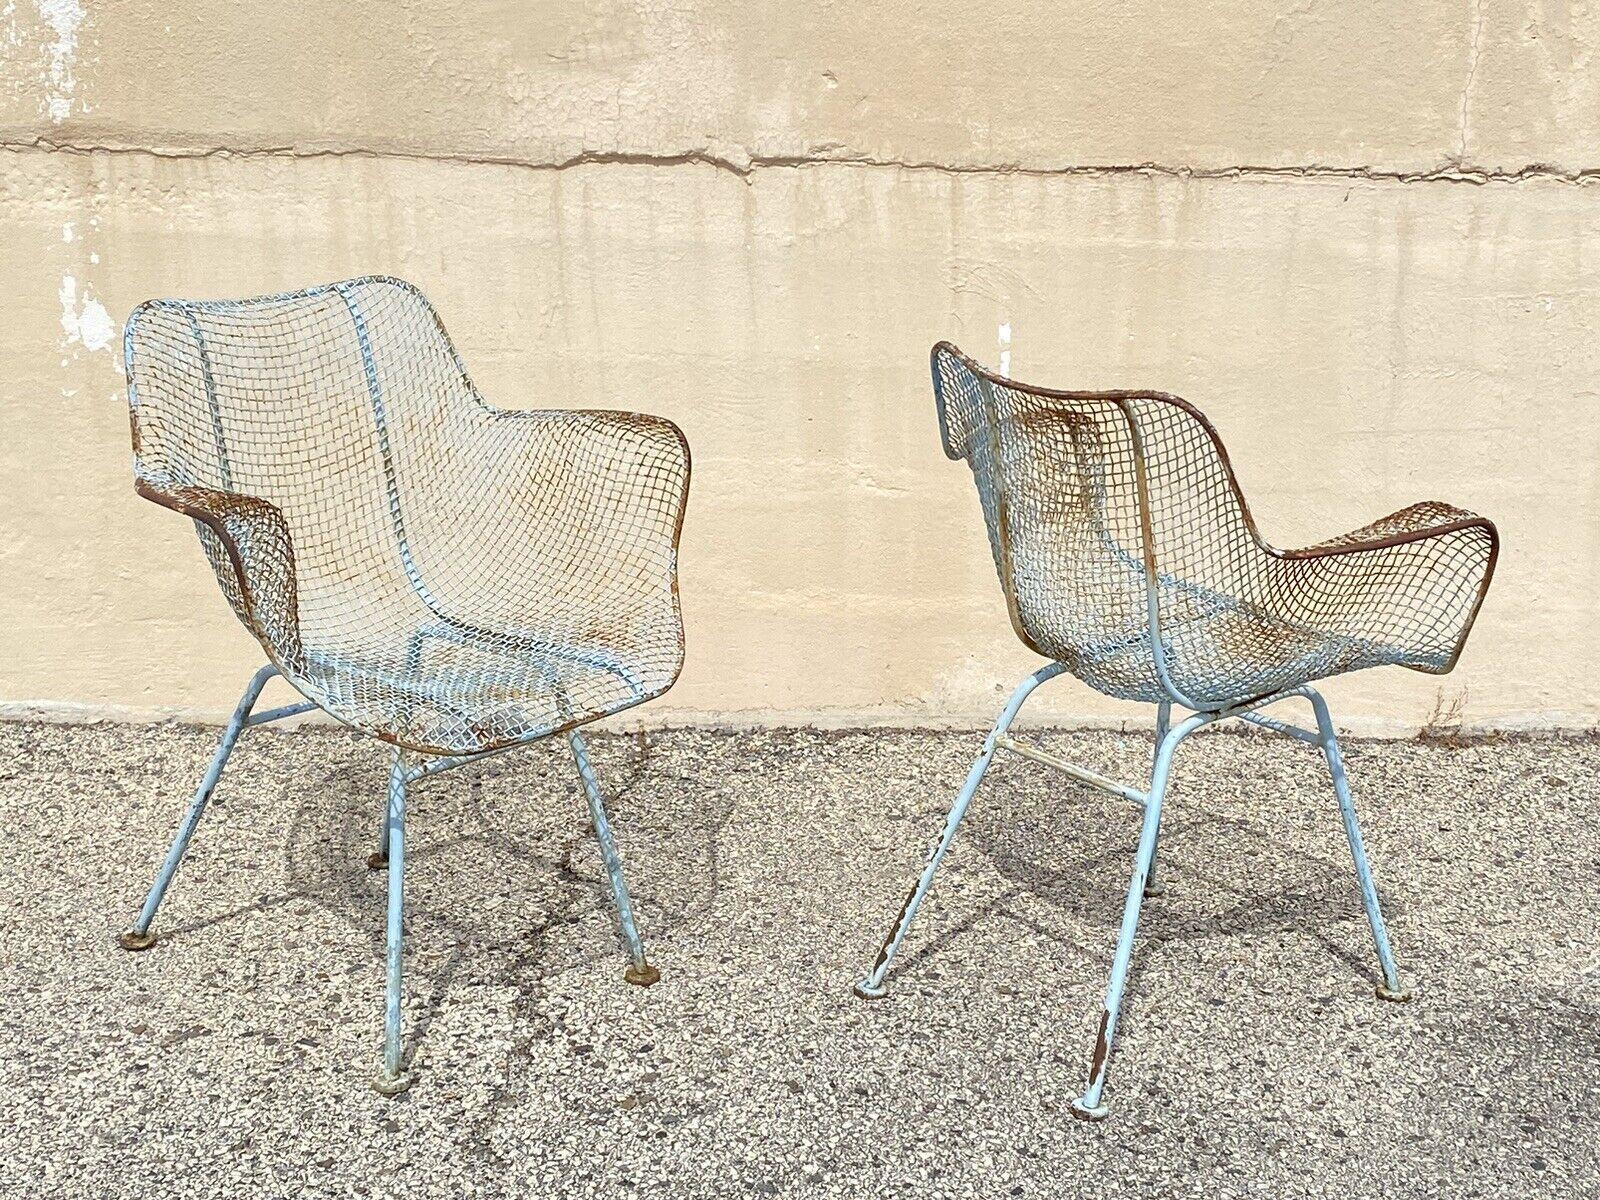 Vintage Mid-Century Modern Russell Woodard Sculptura Wrought Iron Blue Distress Painted Arm Chairs - a Pair. Item features wrought iron frames, distressed blue painted finish, clean Modernist lines, great style and form. Circa Mid-20th century.